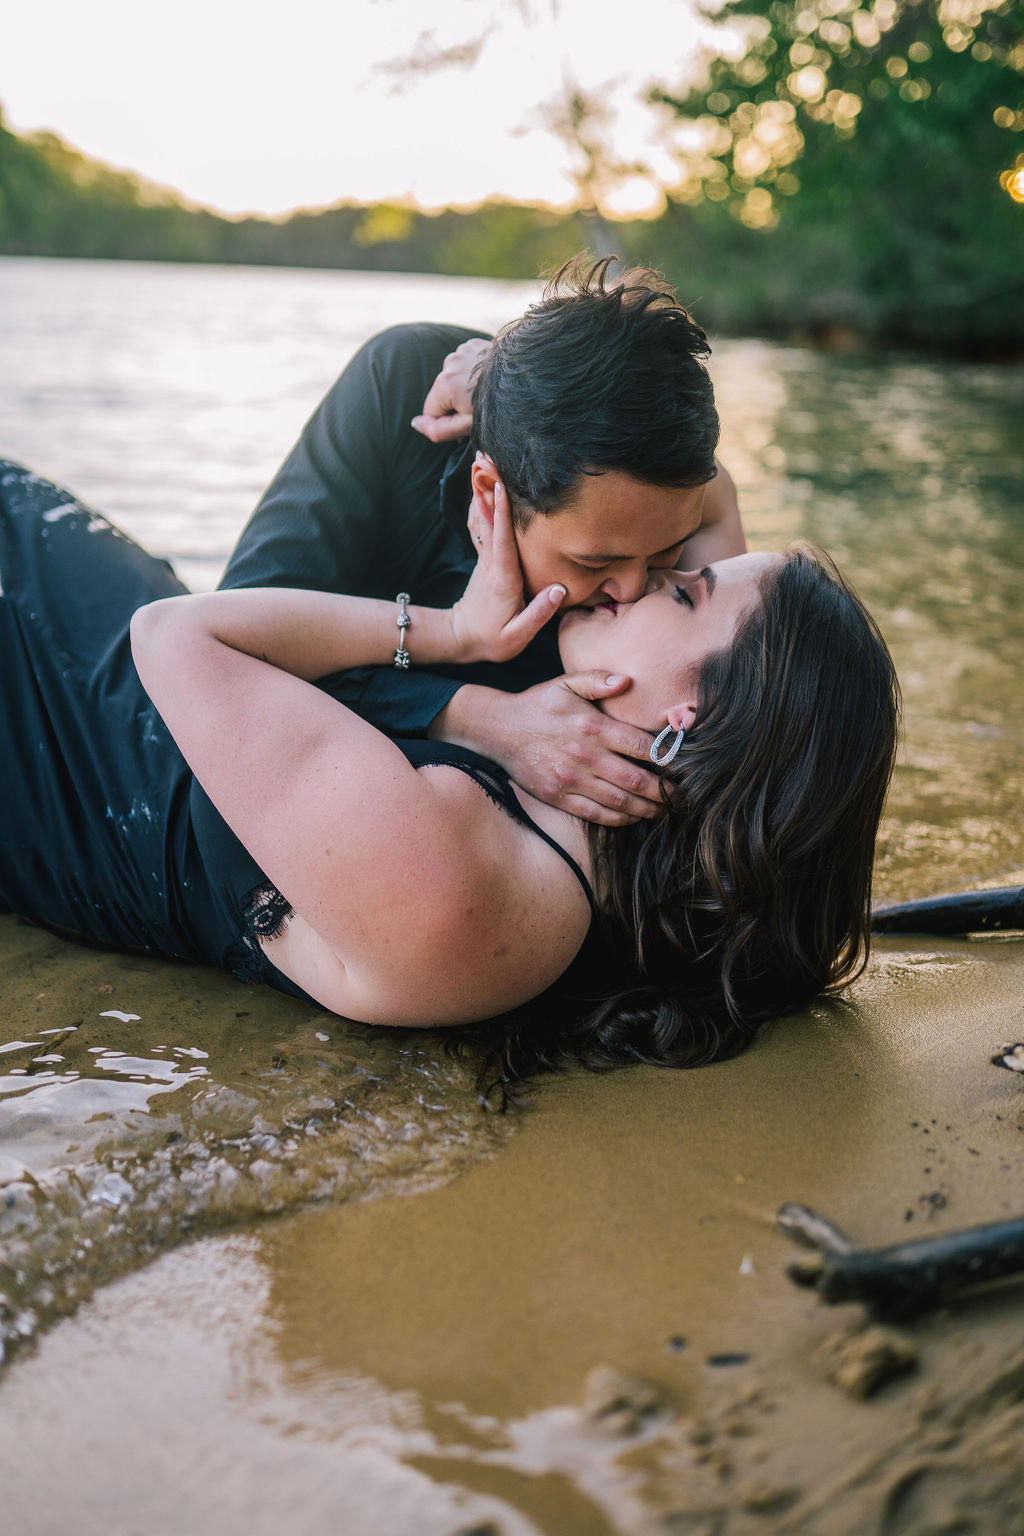 Meads Quarry Tennessee engagement session in the water with man and woman laying down and making out on the beach of Meads Quarry while wearing black